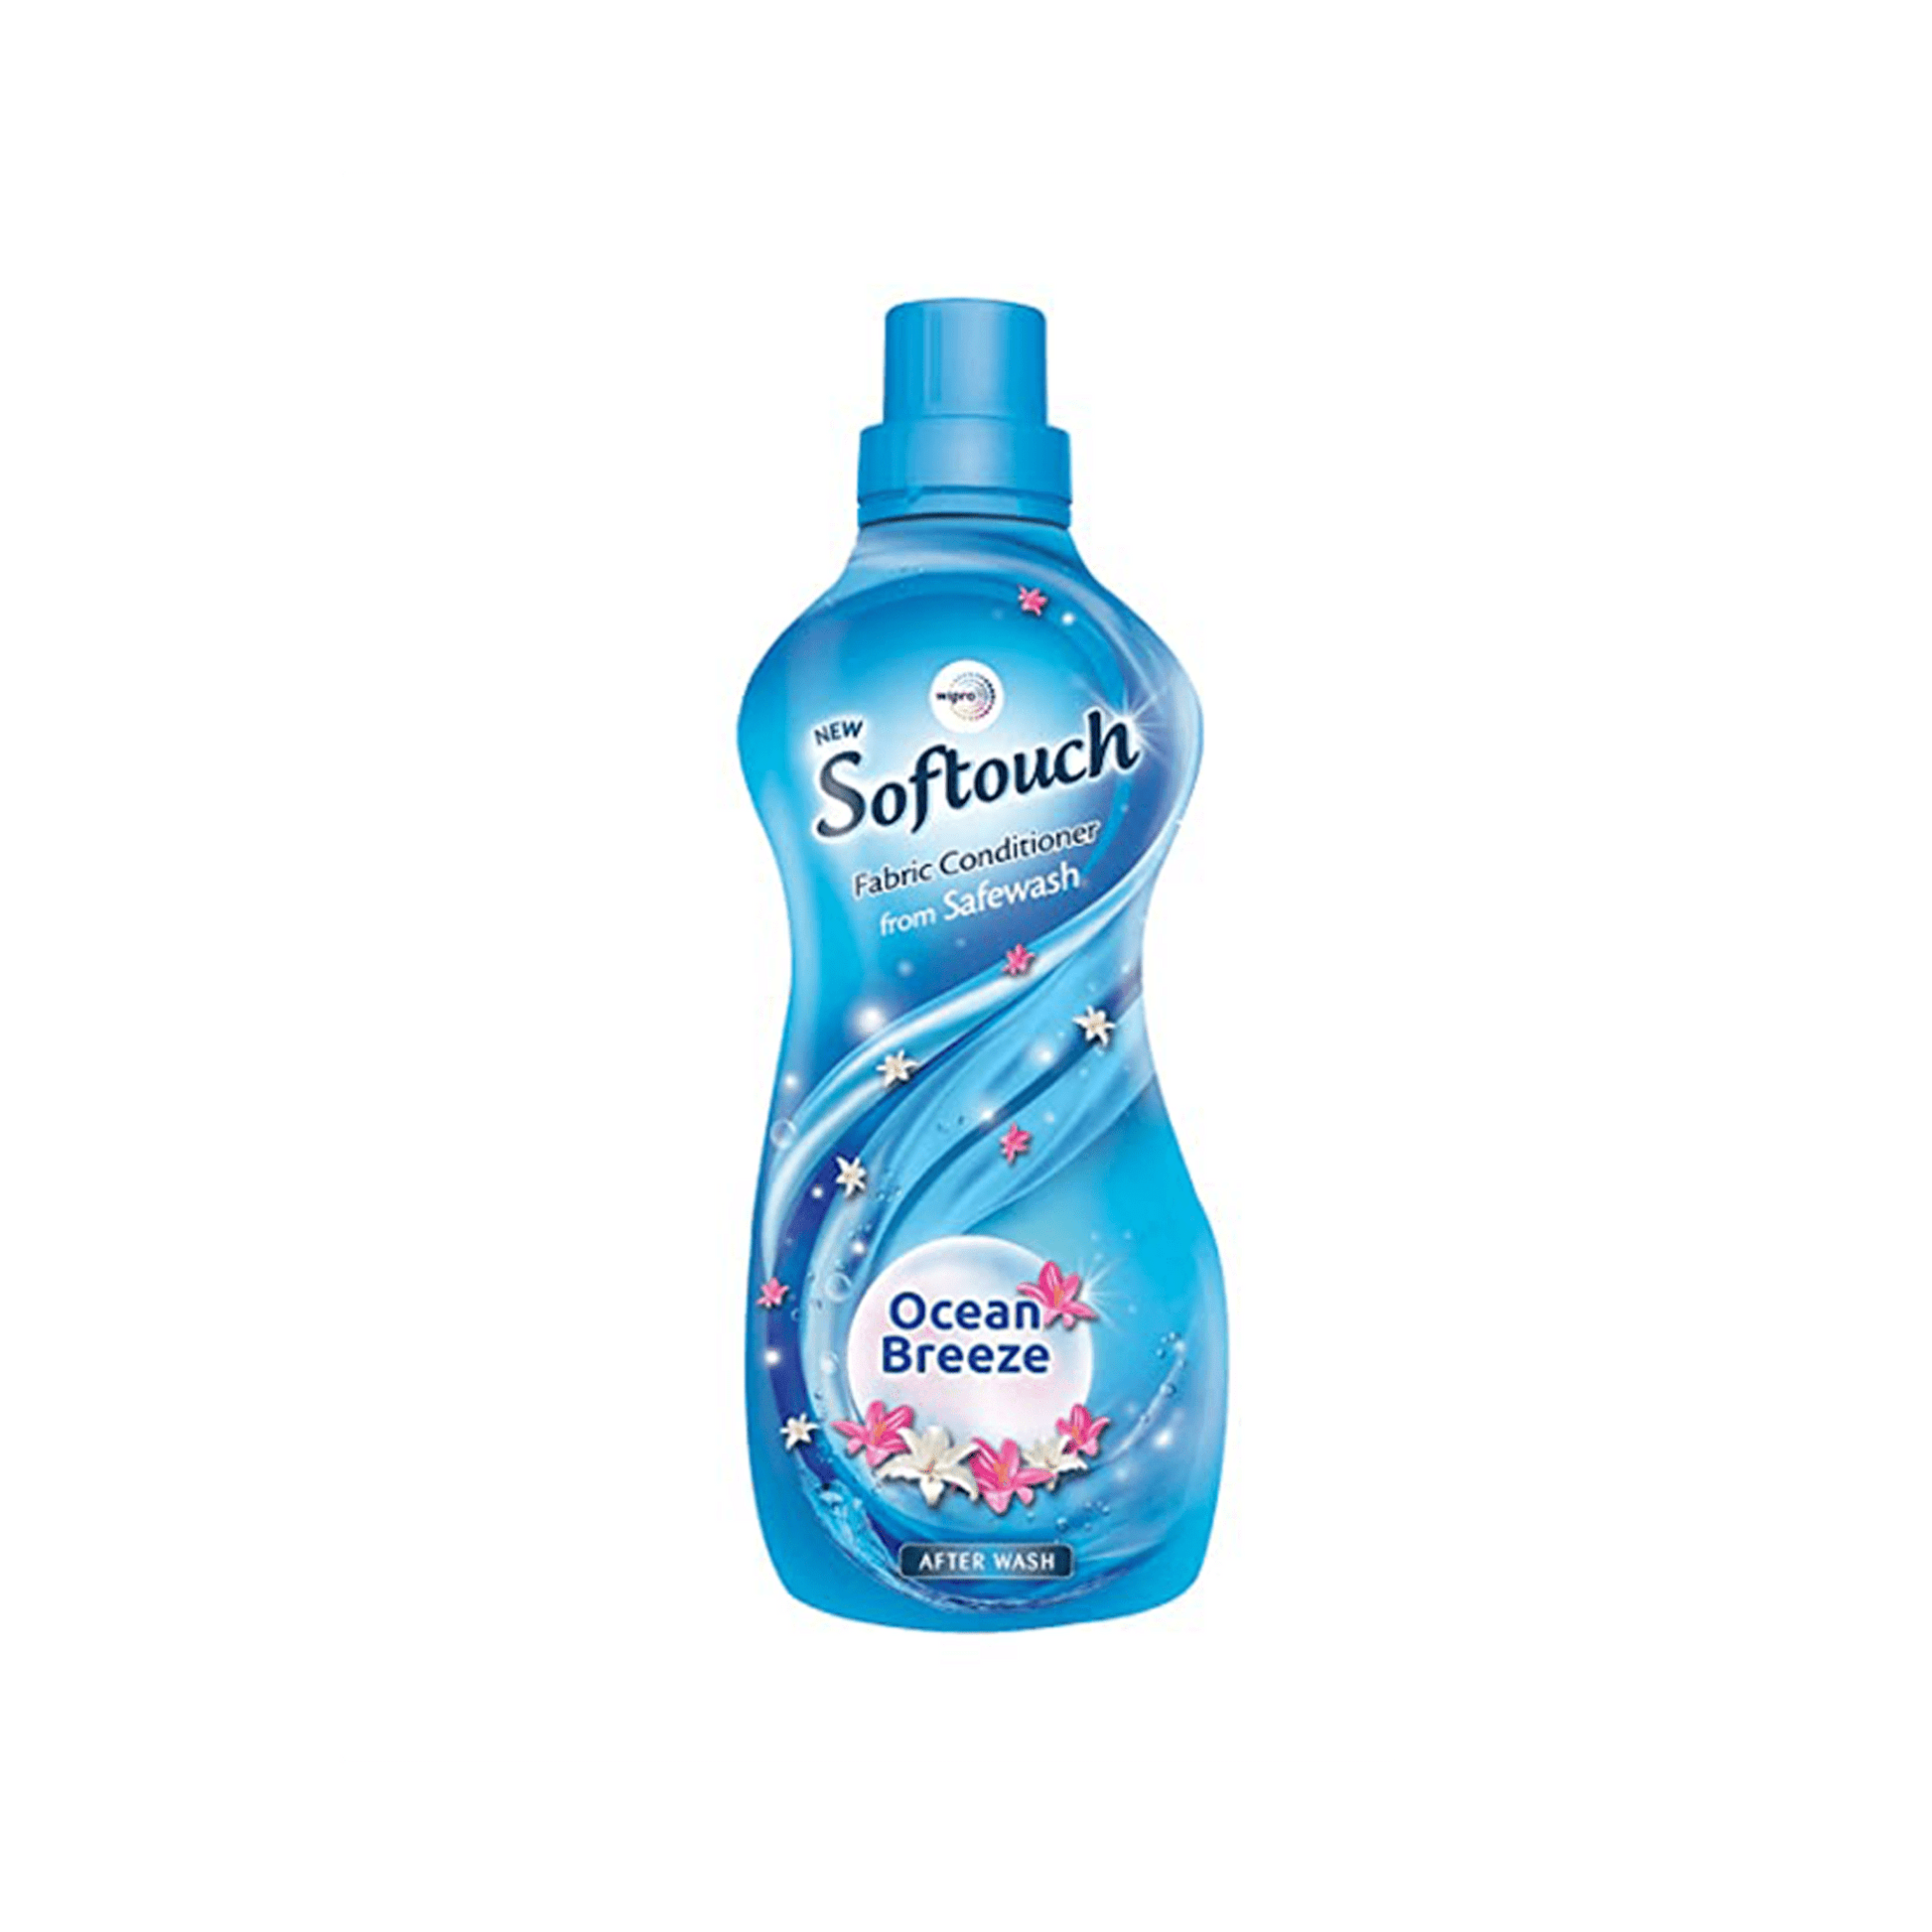 Soft Touch Fabric Conditioner - Ocean Breeze.